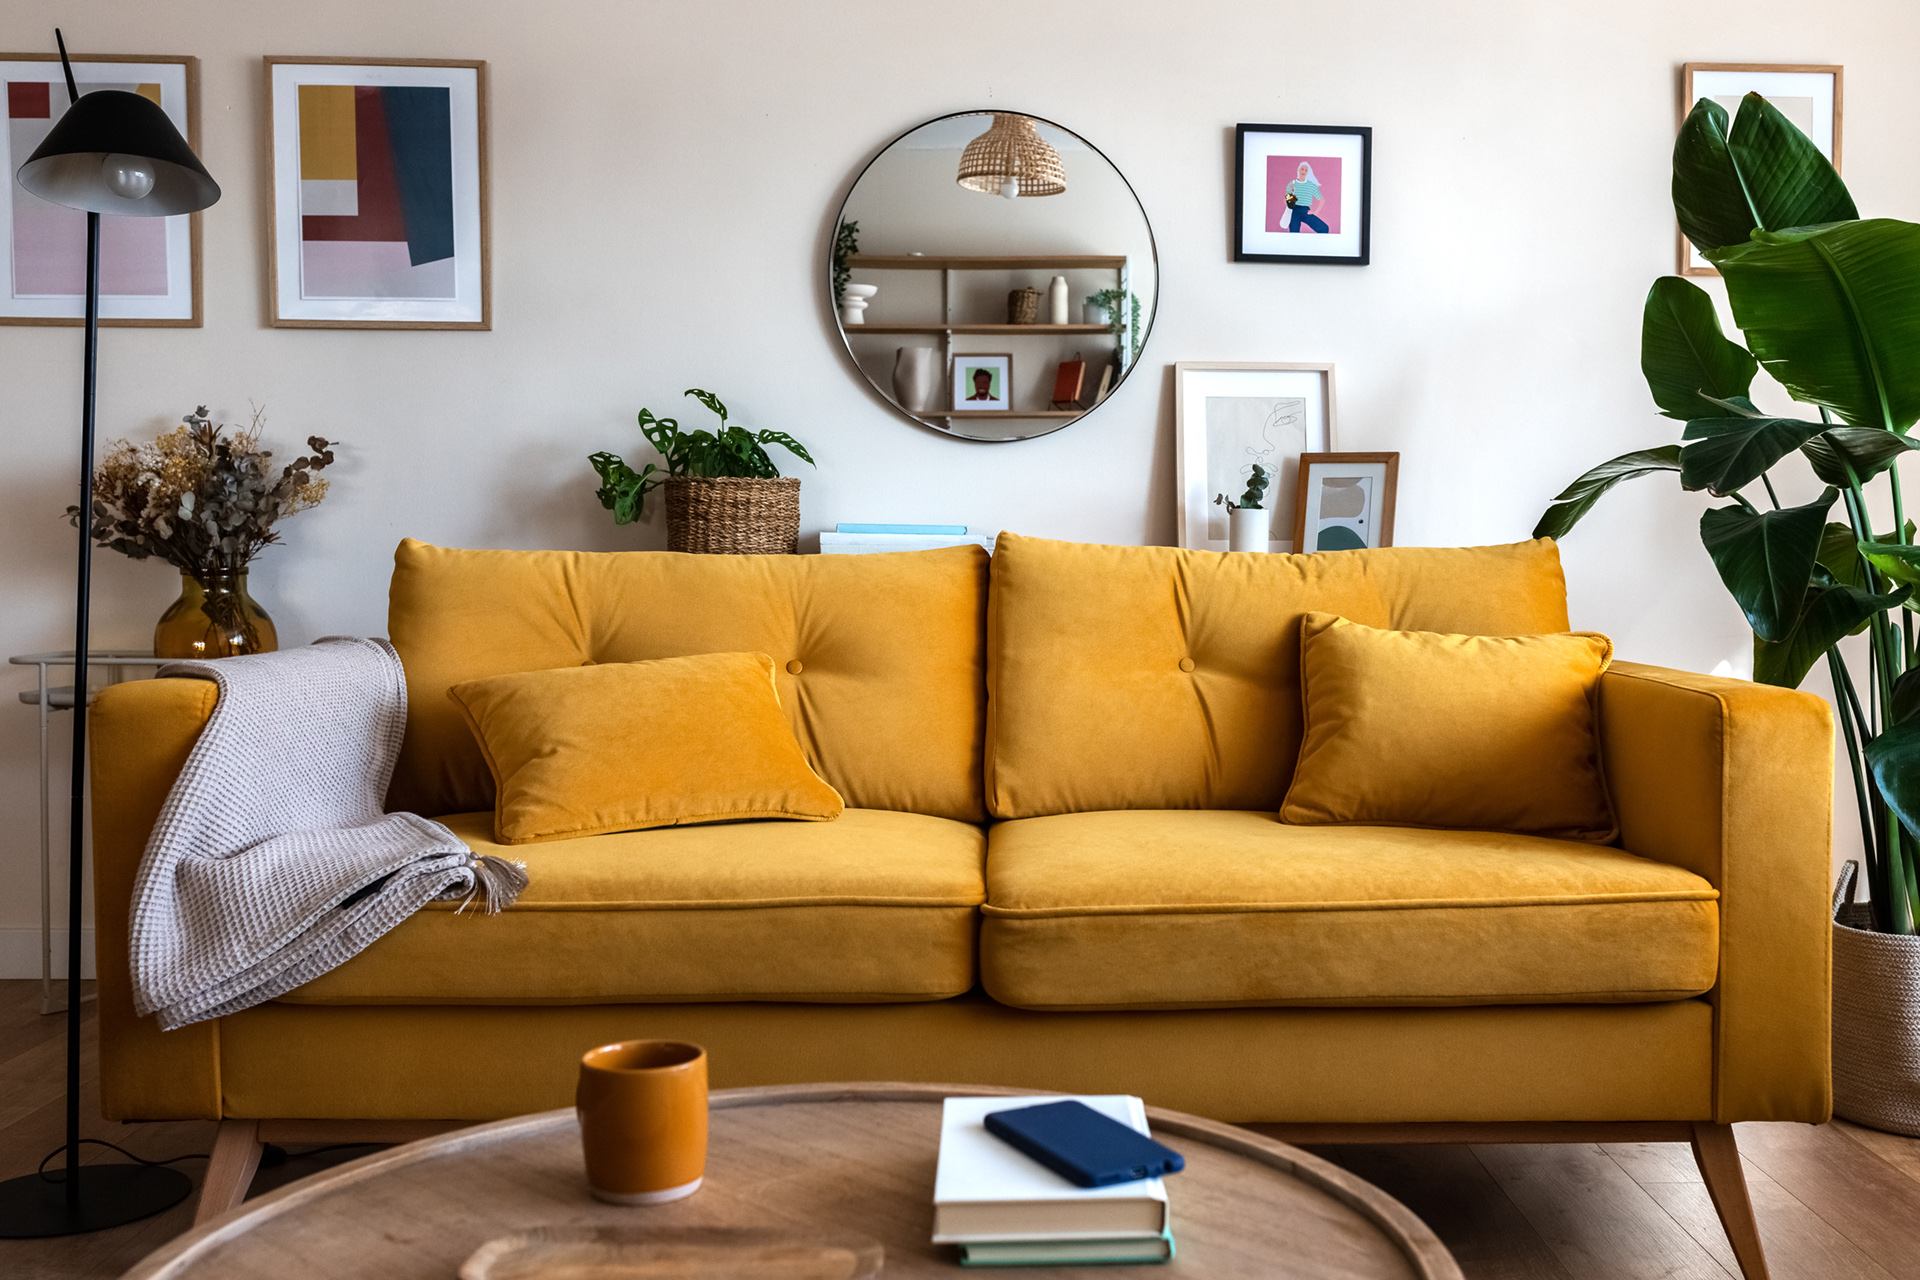 front view of yellow couch in living room with wall art and mirror